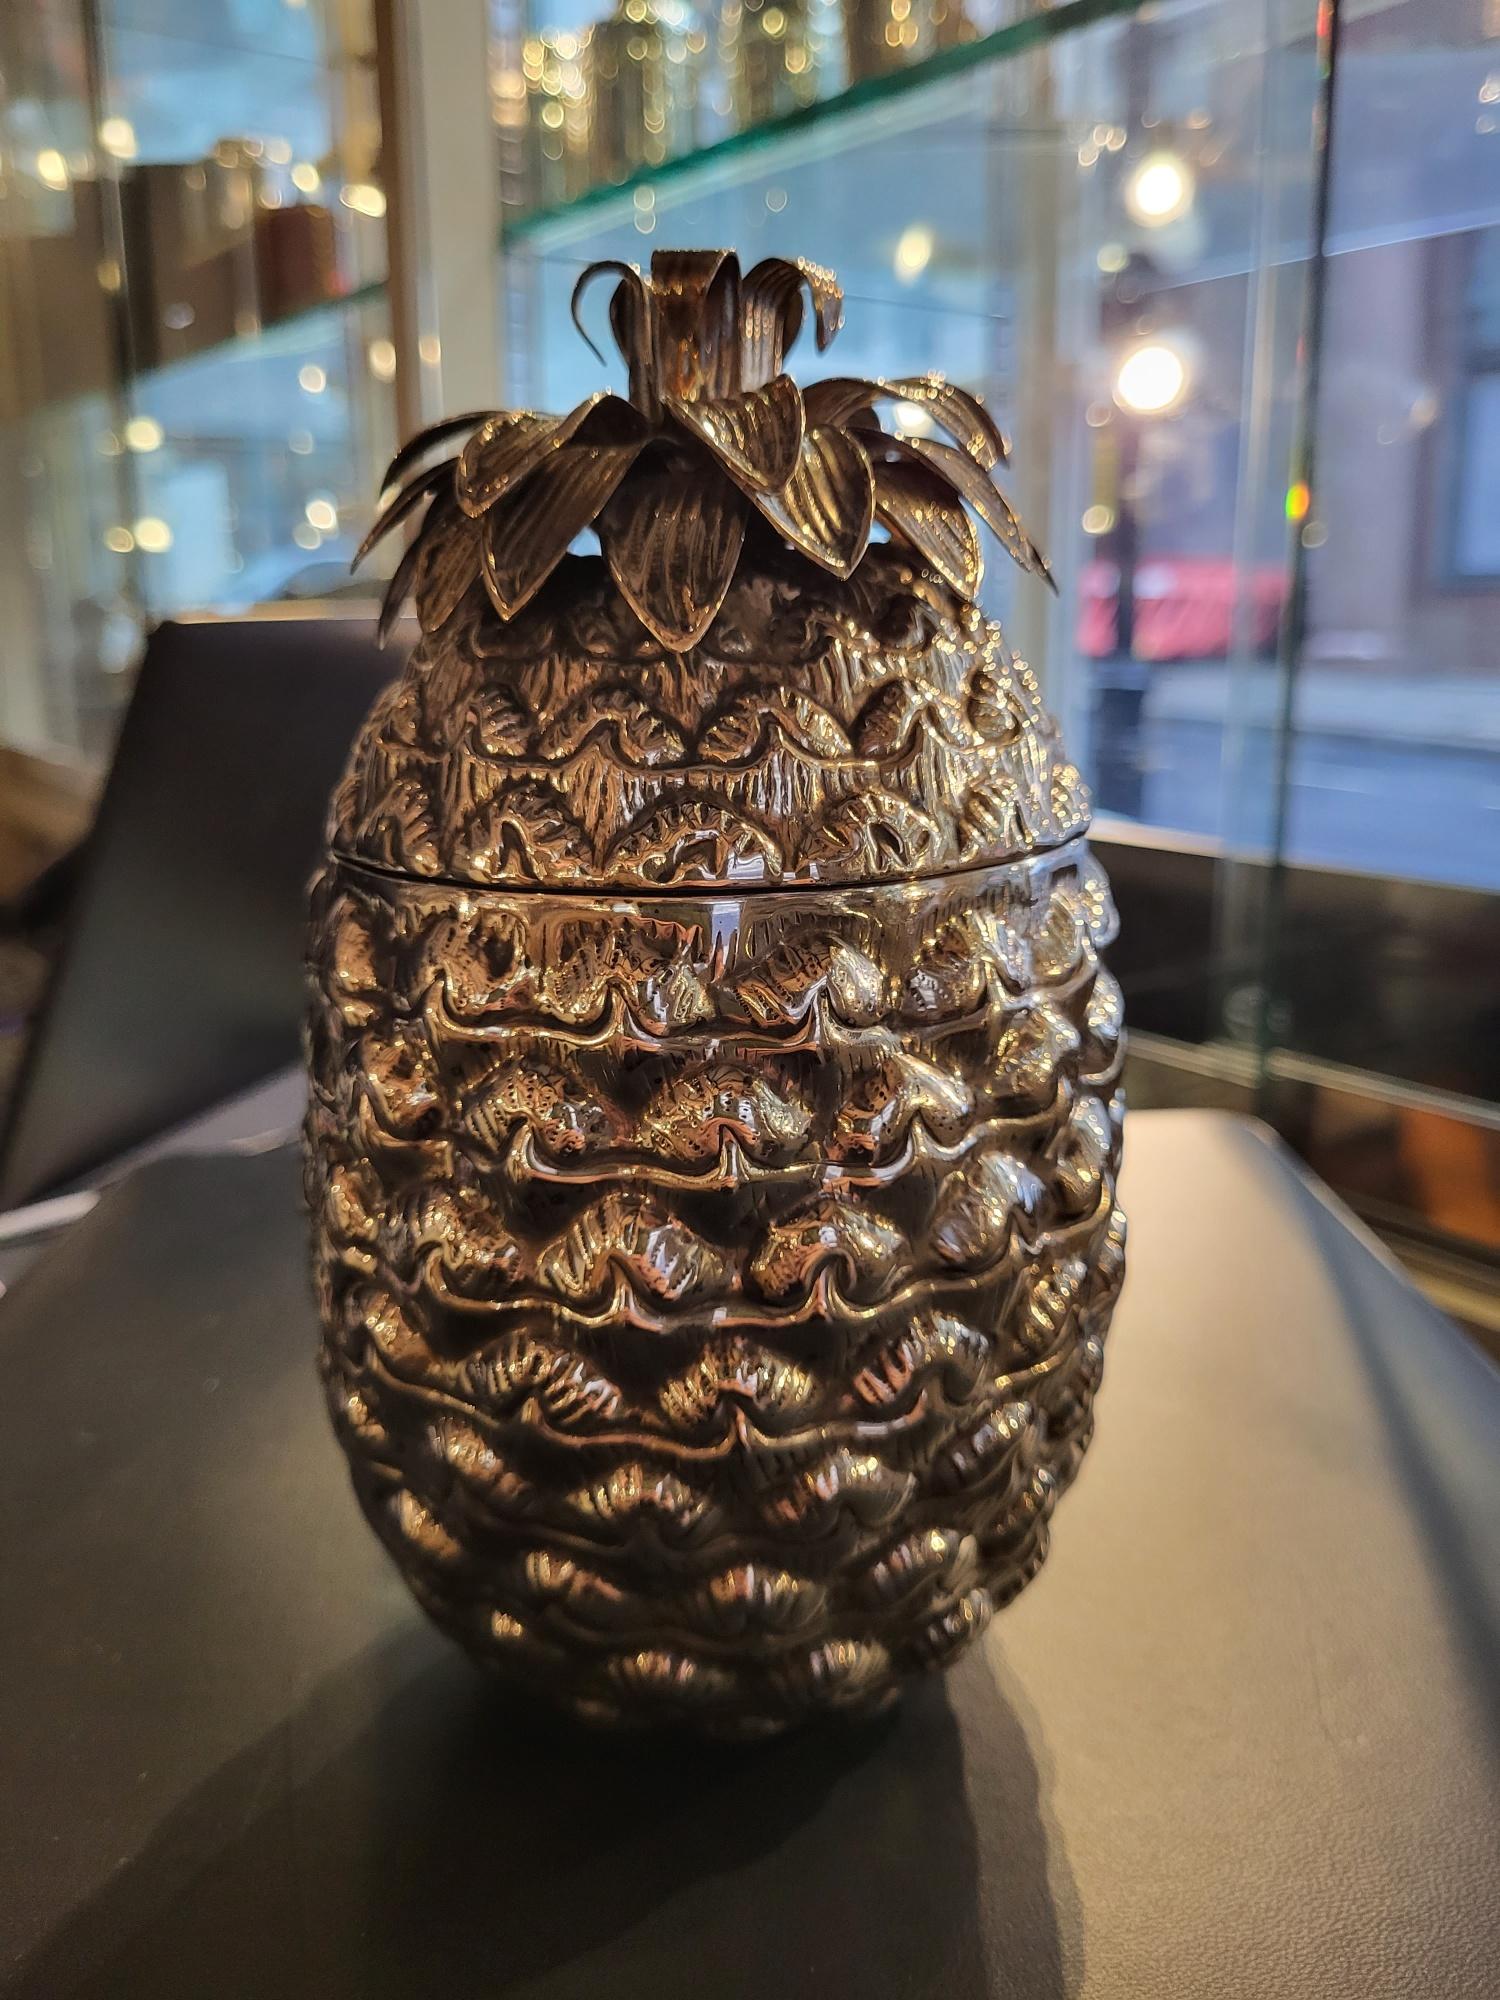 Alessandria, Italy

An extremely unusual and decorative silver pineapple-form lidded box, or perhaps can be used as a personal bucket for ice cubes, with a realistic-modelled body with a crown of leaves, the lid lifting to reveal a fully gilded